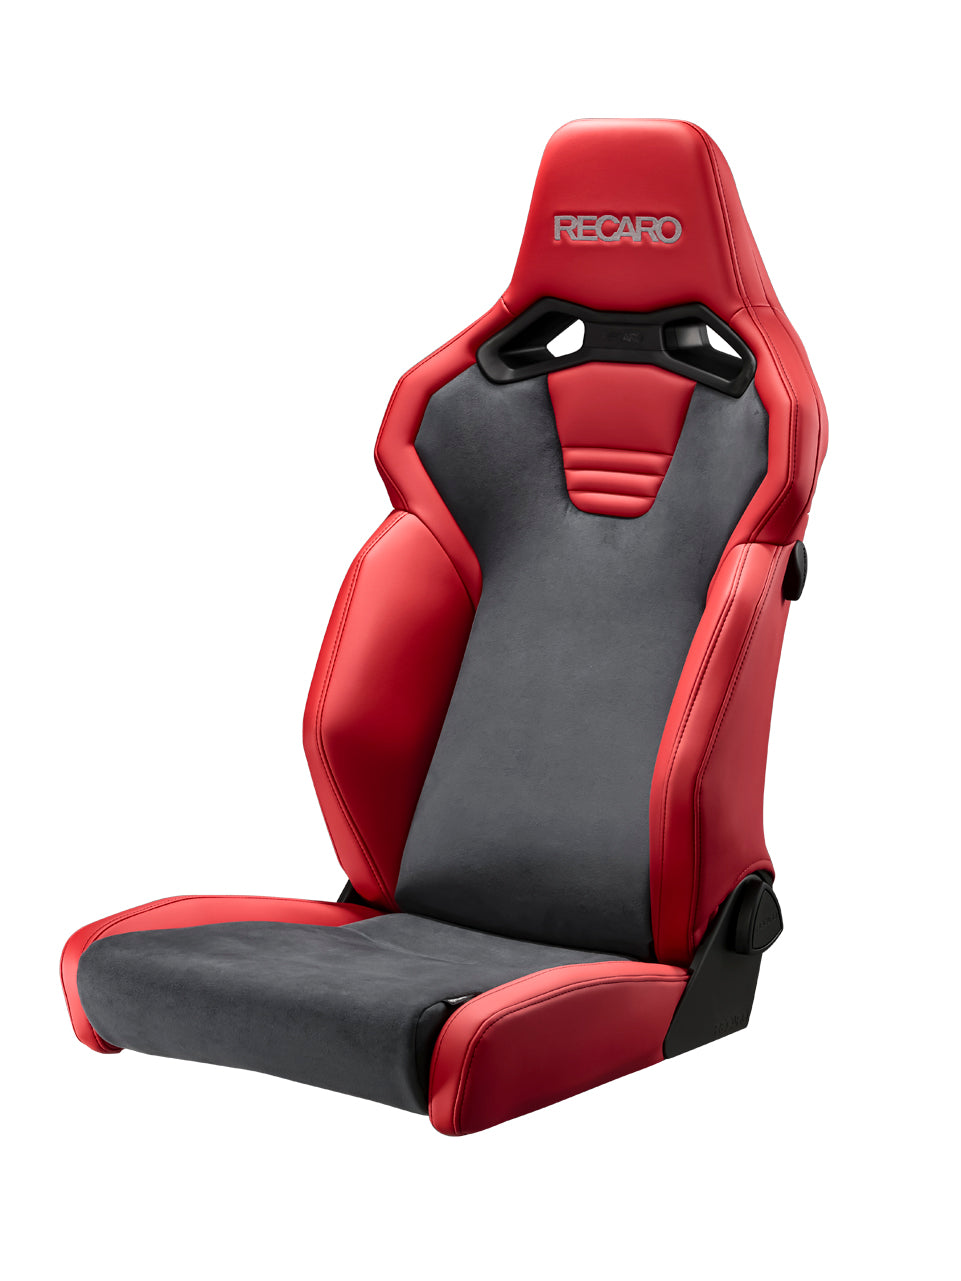 RECARO SR-C UT100H A R CG RD ARTIFICIAL LEATHER RED COLOR AND ULTRA SUEDE CHARCOAL GRAY COLOR ARMREST ATTACHEBLE WITH HEATED SEATS FOR  81-121.29.647-0